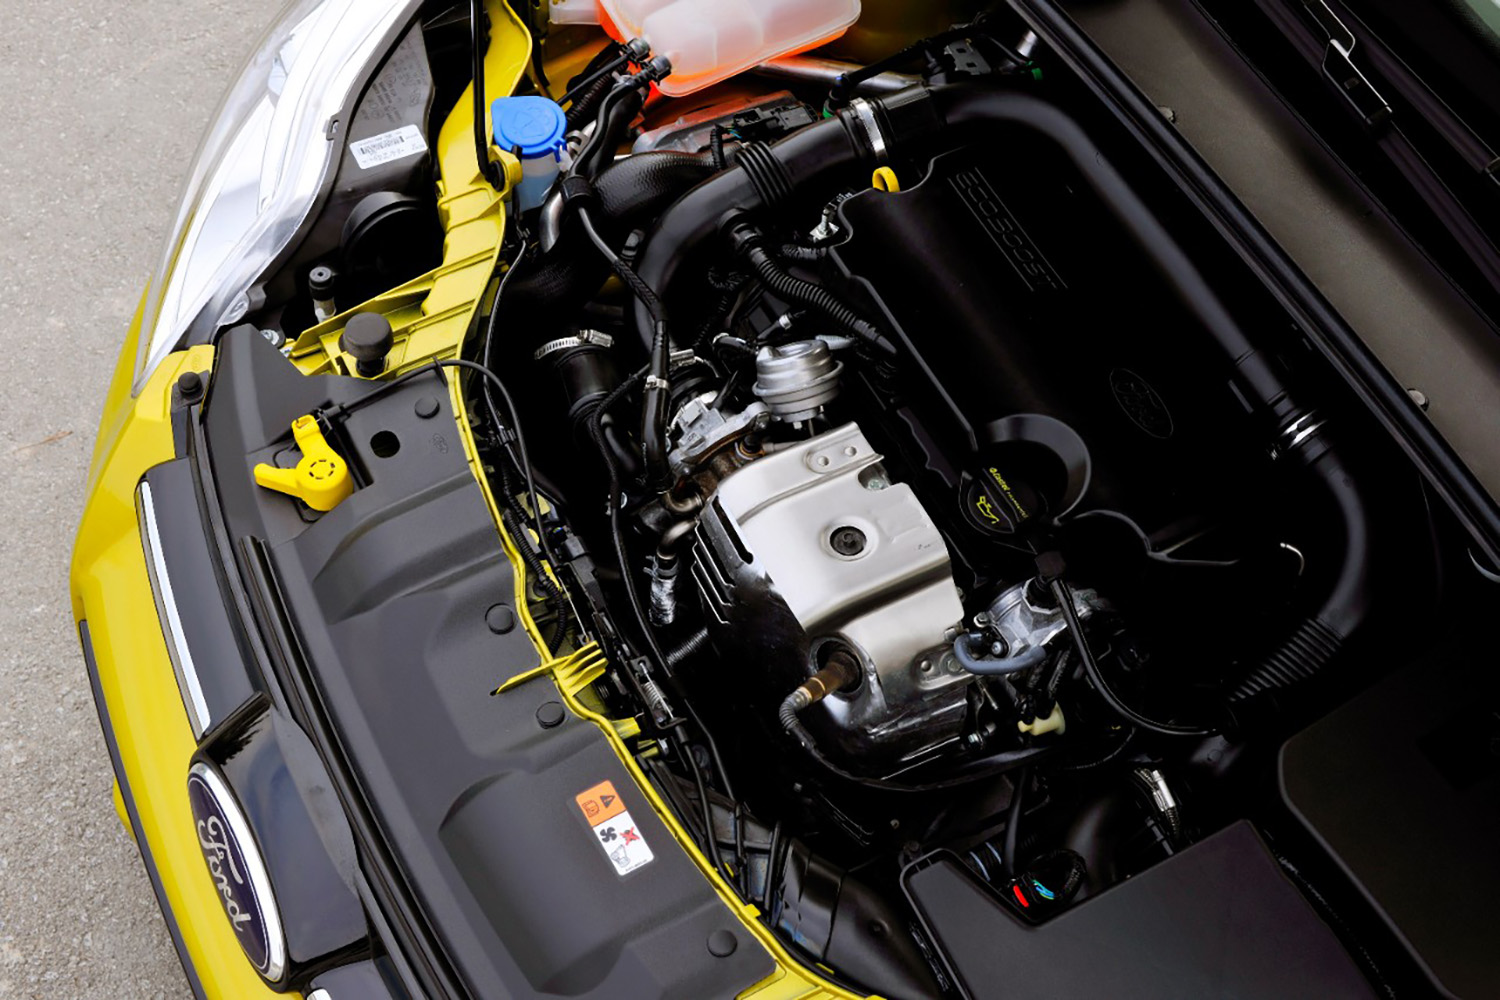 Engine bay of a lime green Ford Focus with 1.0-liter Ecoboost three-cylinder engine